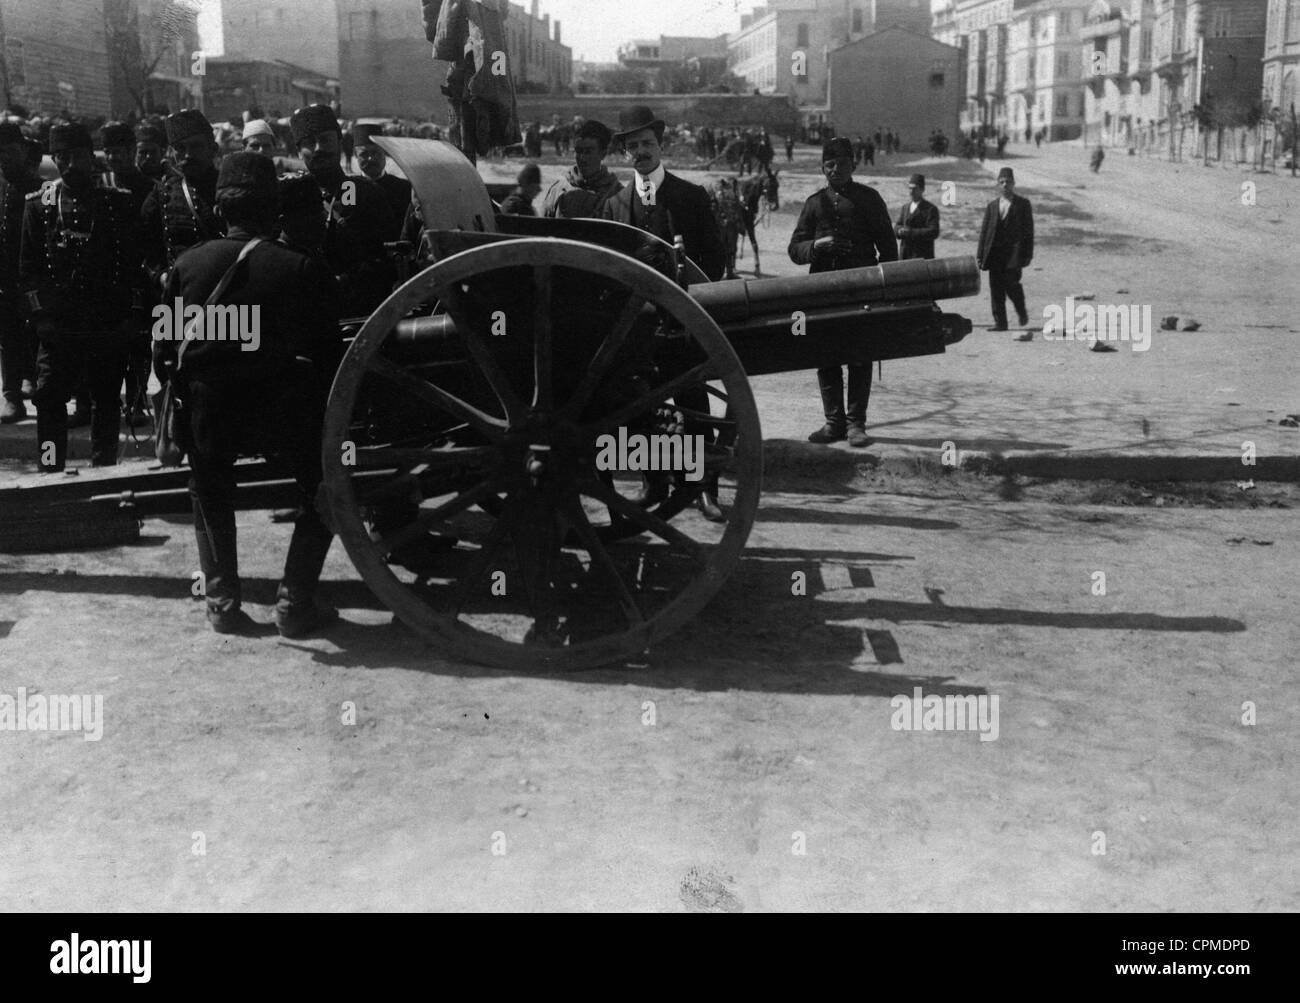 Young Turks troops in Pera, 1909 Stock Photo